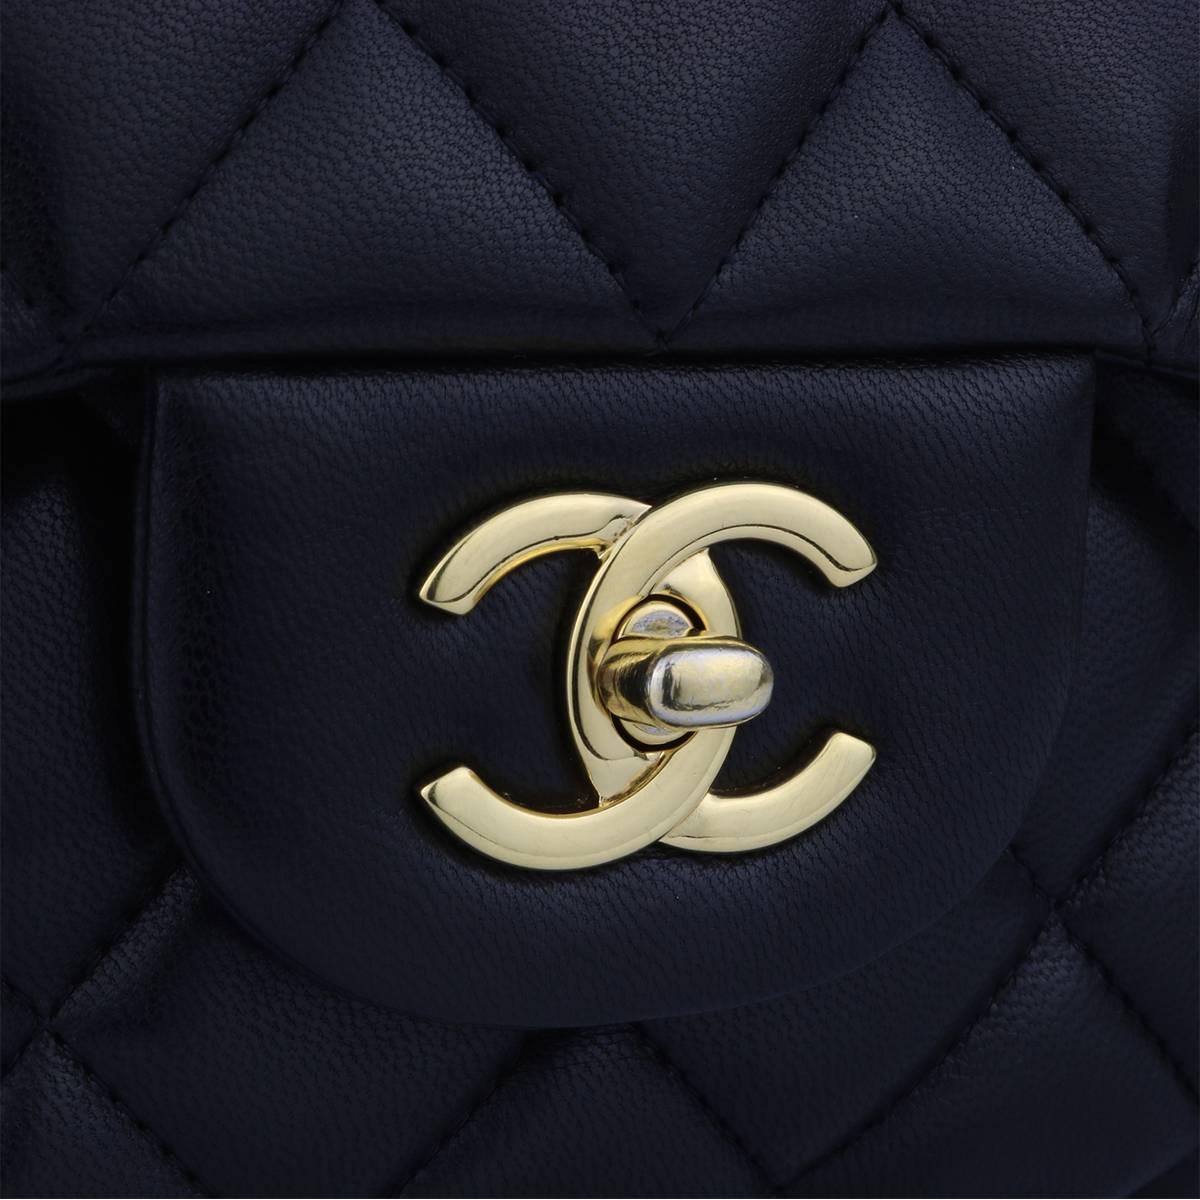 Authentic CHANEL Classic Jumbo Double Flap Black Lambskin with Gold Hardware 2013.

This stunning bag is in an excellent condition, the bag still holds its shape very well, and the hardware is still very shiny.

Exterior Condition: Great condition,